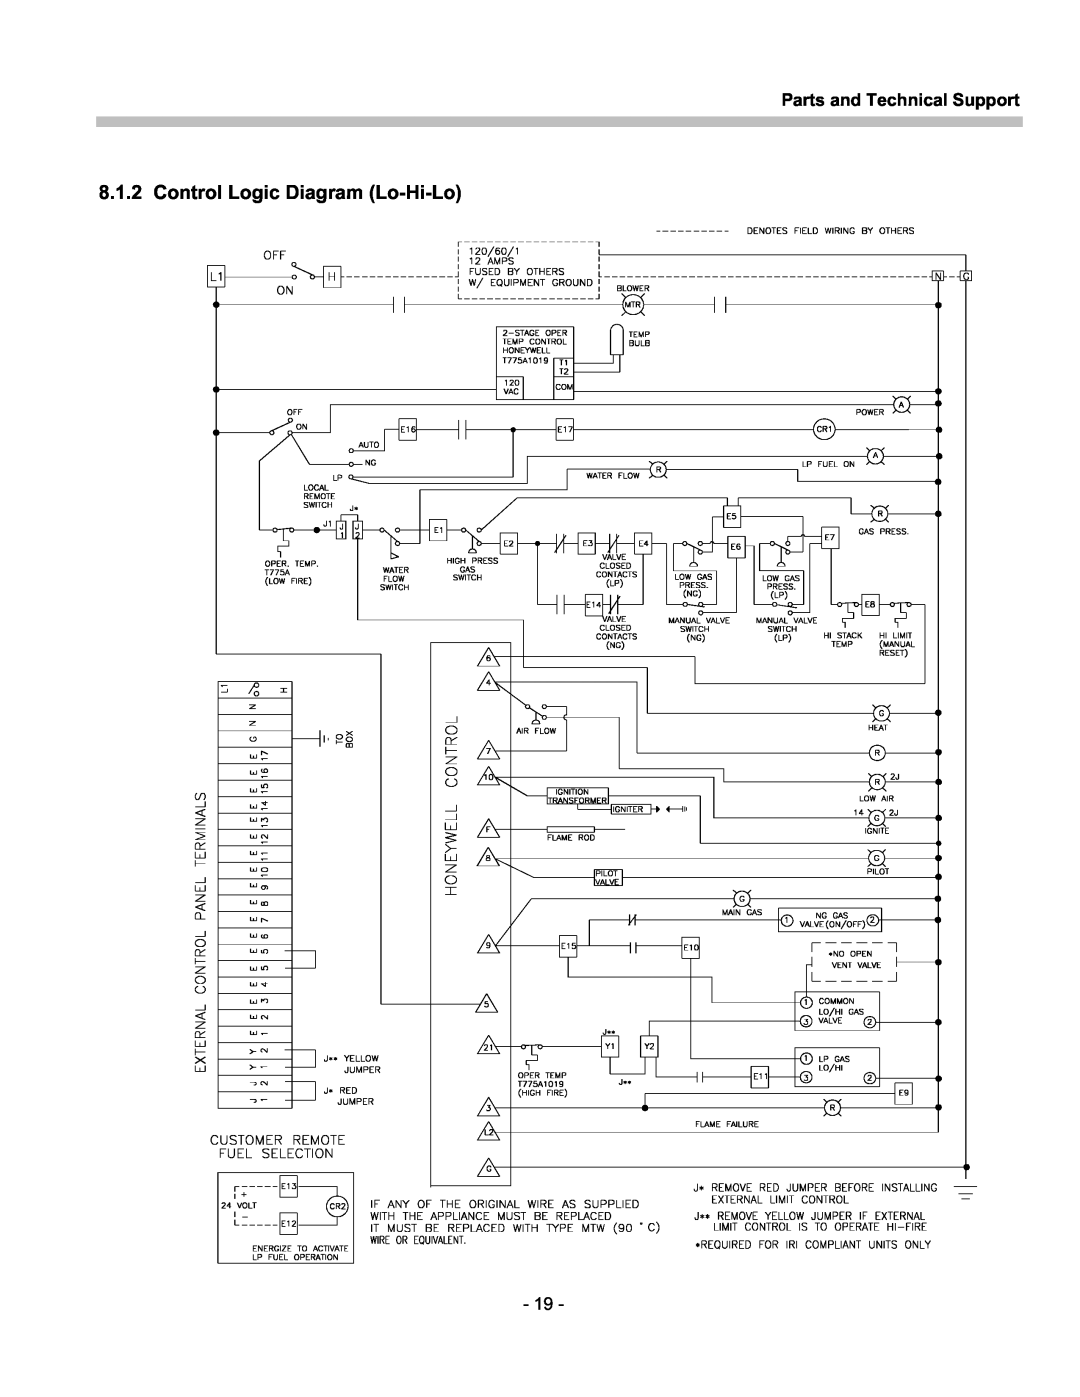 Patterson-Kelley TBIG-03 owner manual Control Logic Diagram Lo-Hi-Lo, Parts and Technical Support 